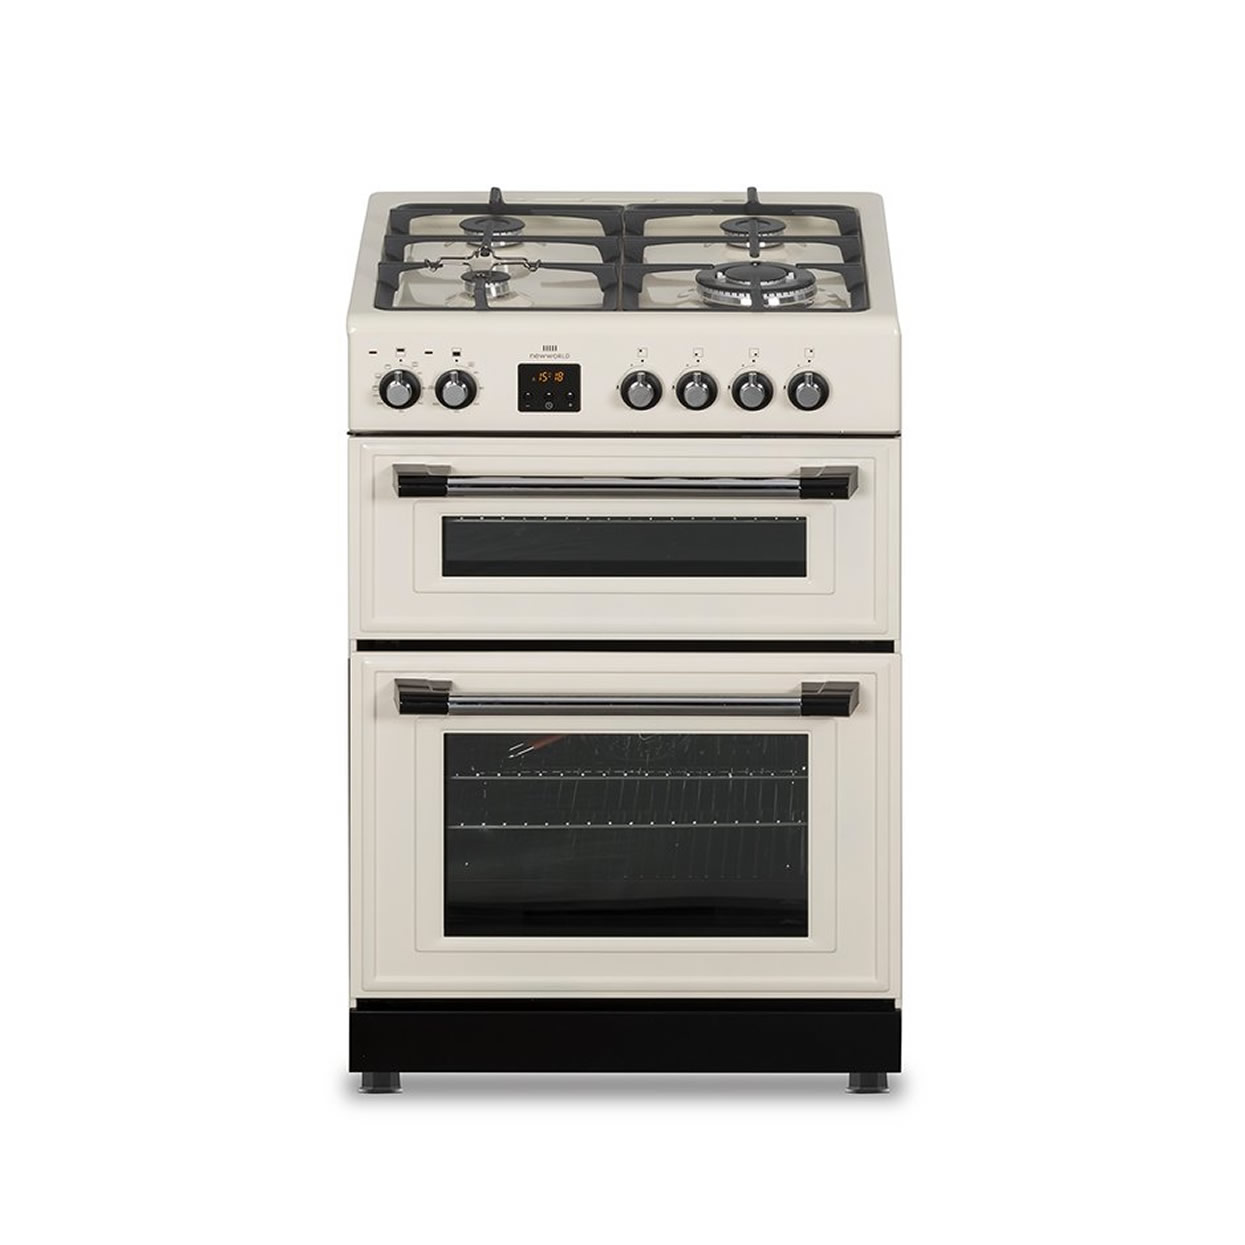 New-World 600mm Double Oven Dual Fuel Cooker Gas Hob Cream